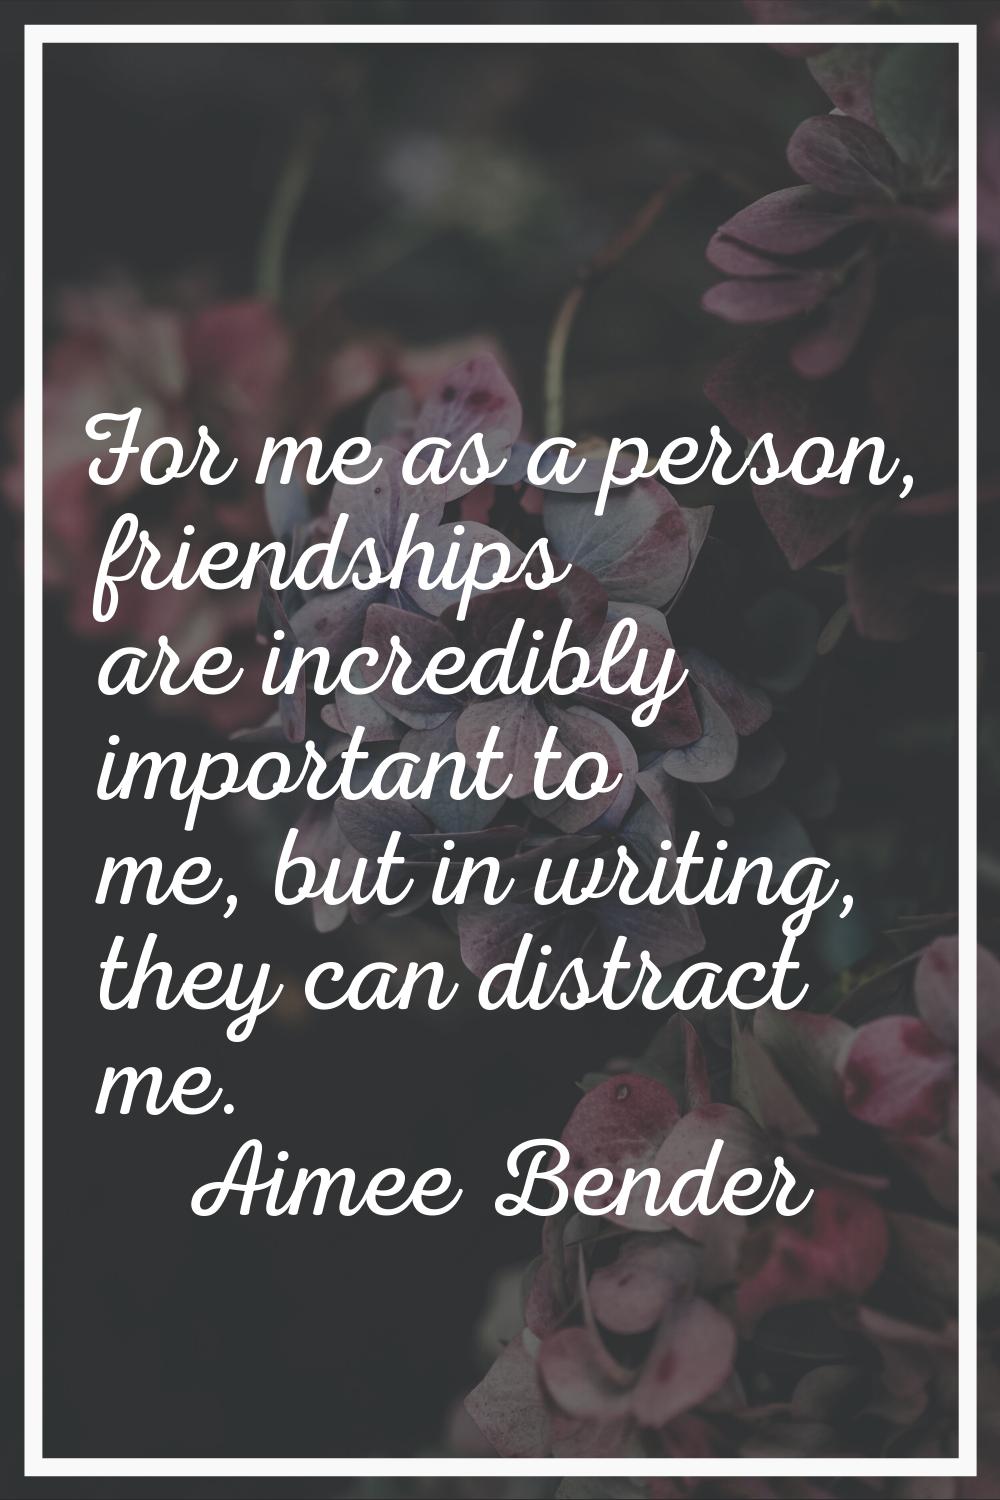 For me as a person, friendships are incredibly important to me, but in writing, they can distract m